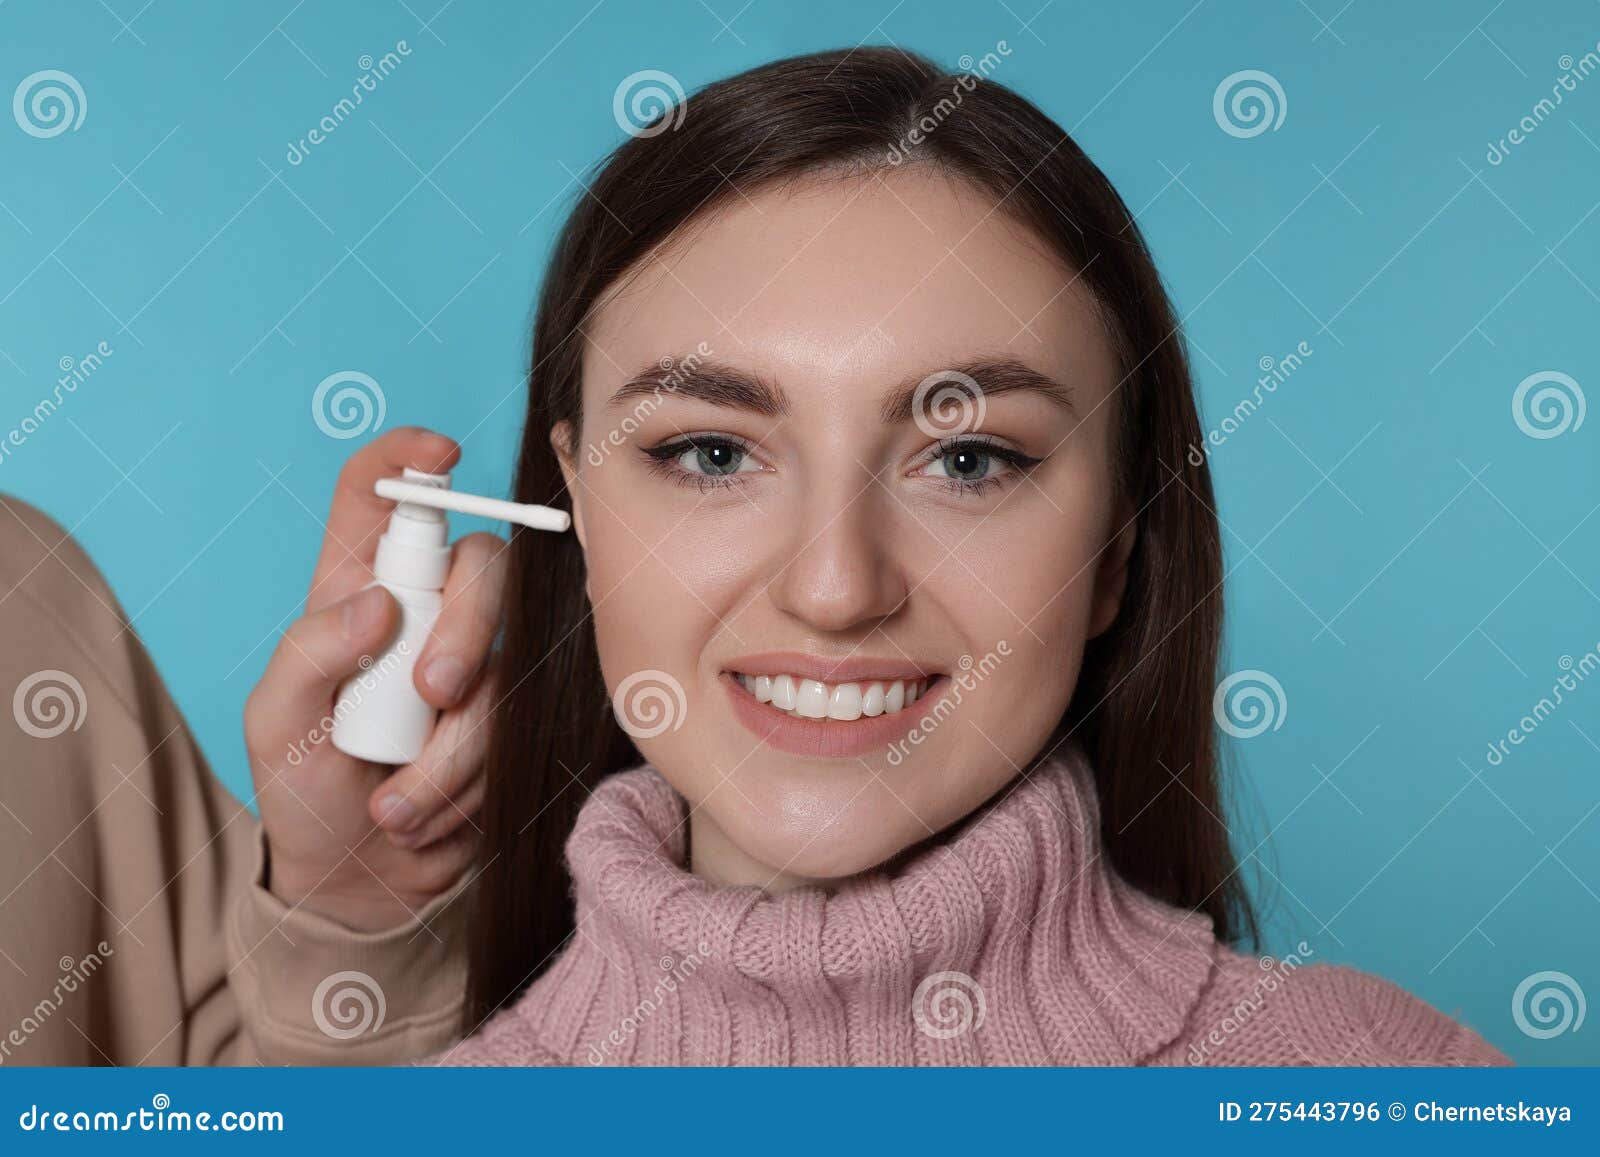 man spraying medication into woman`s ear on light blue background